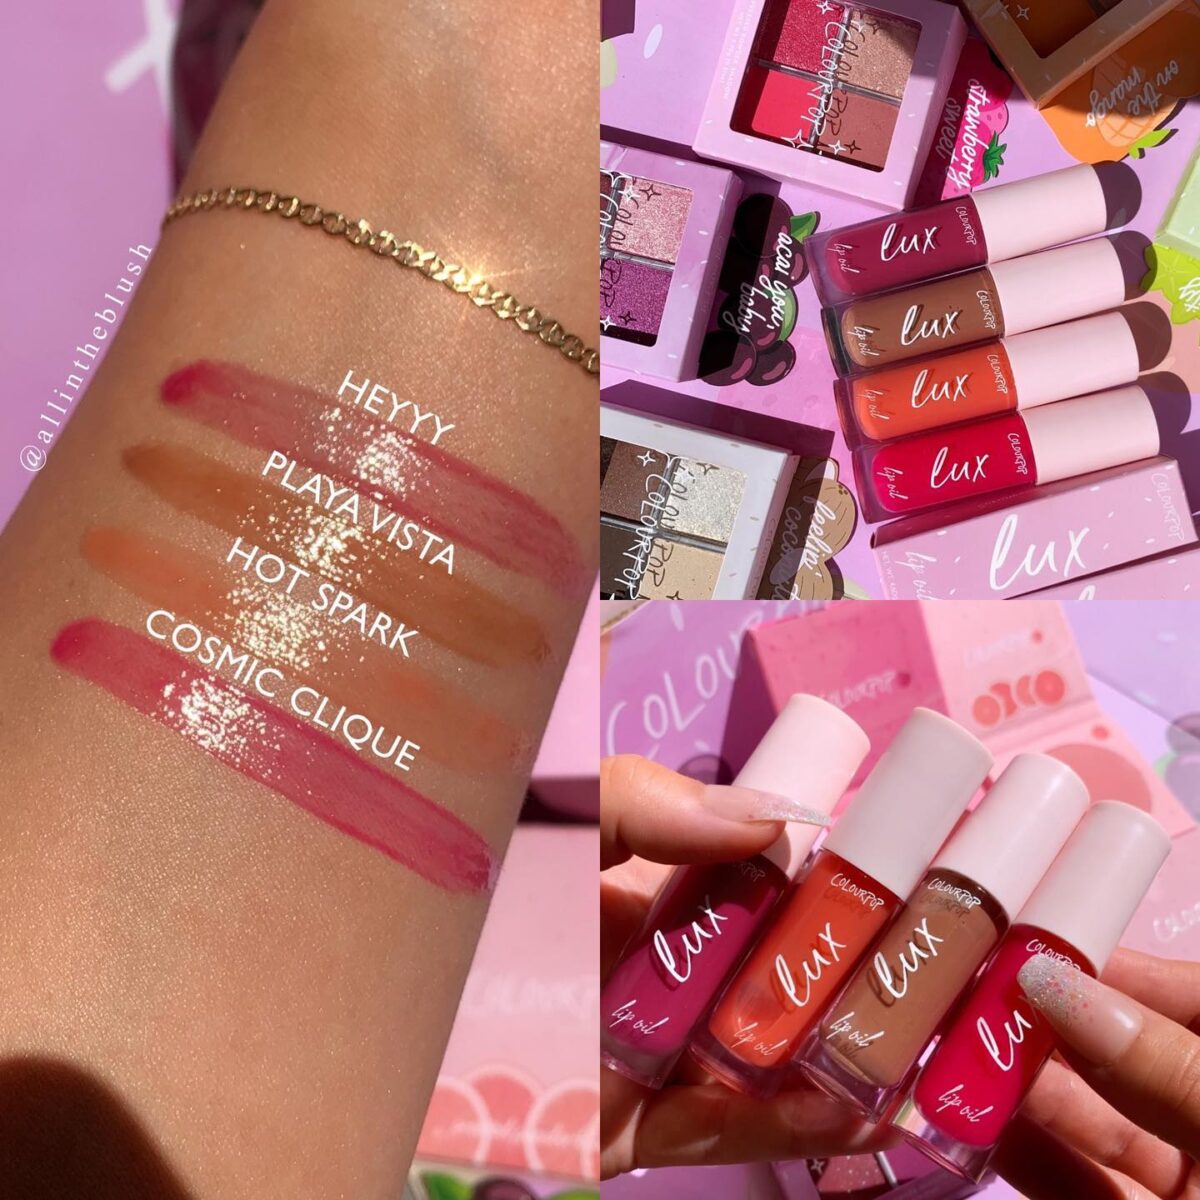 NEW Smoothie Talk Lip Set from ColourPop: Review & Swatches